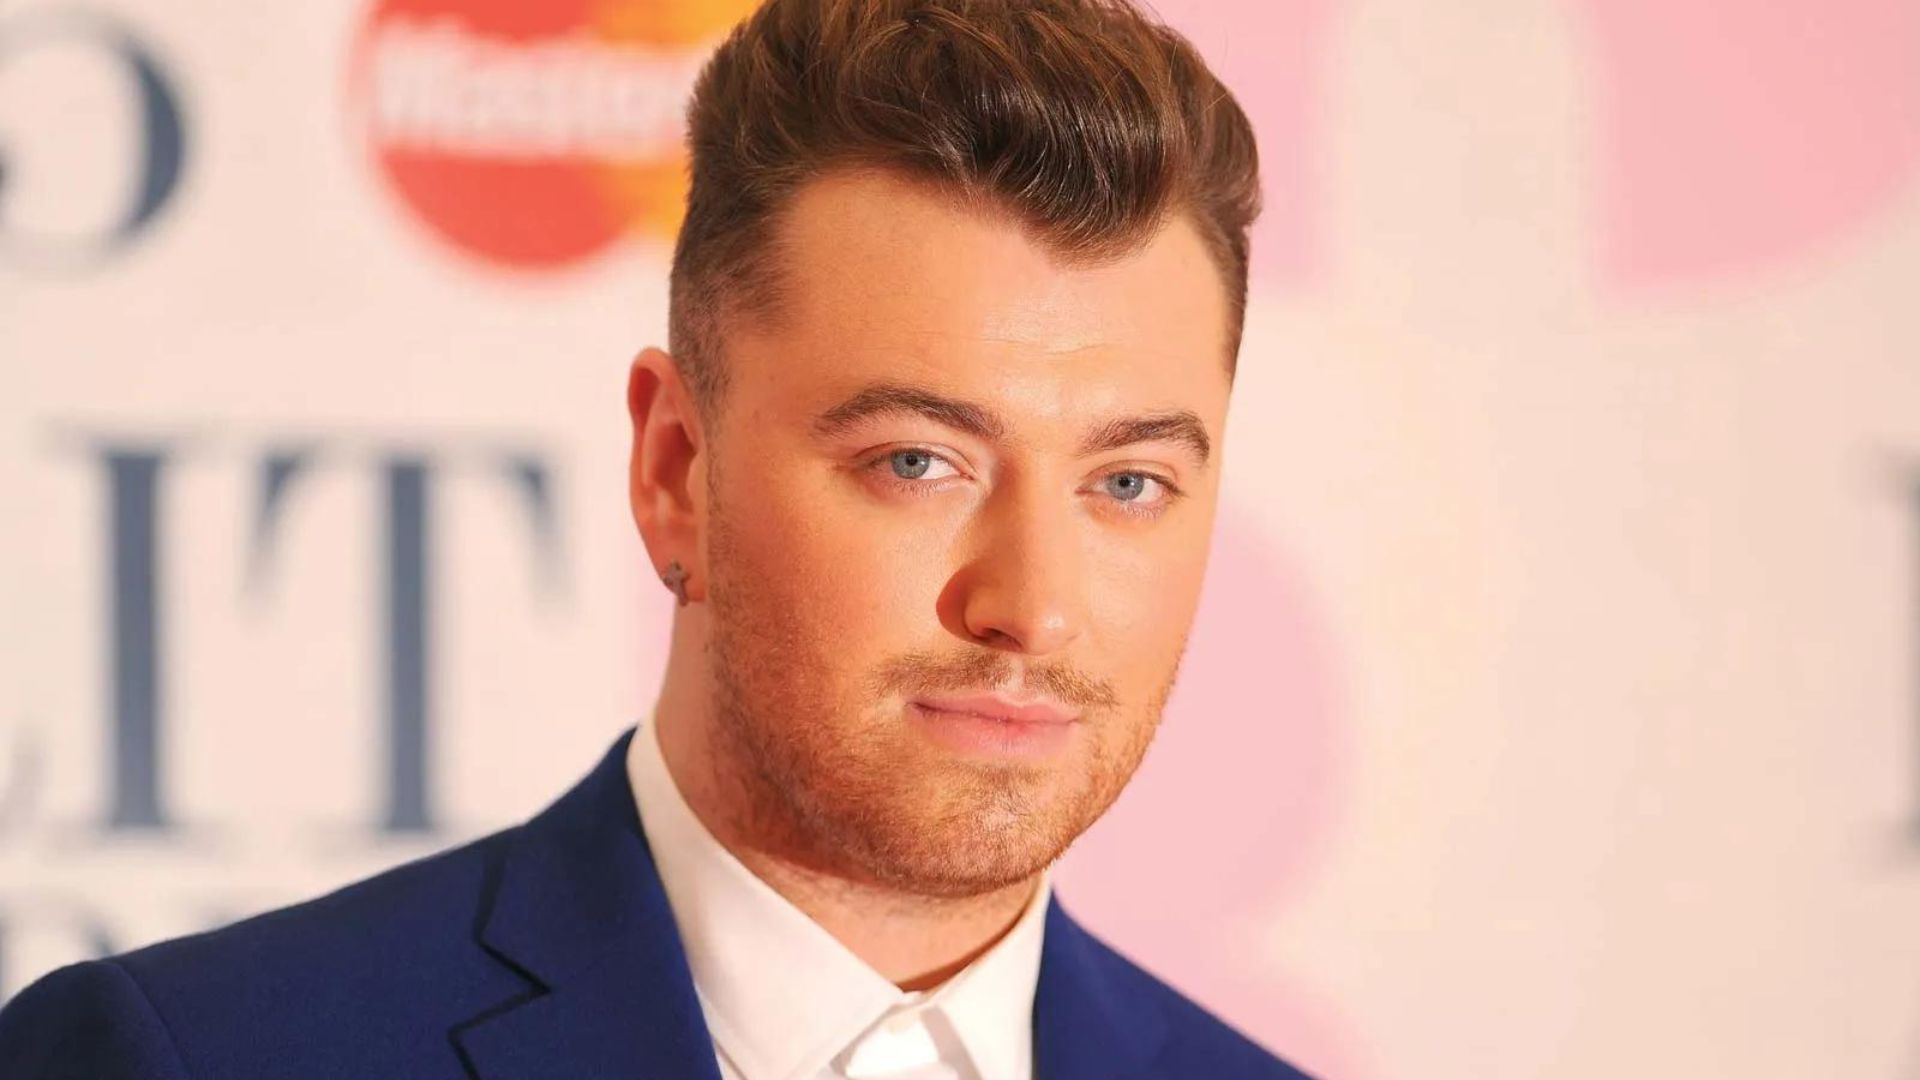 Sam Smith Wearing A Blue Suit